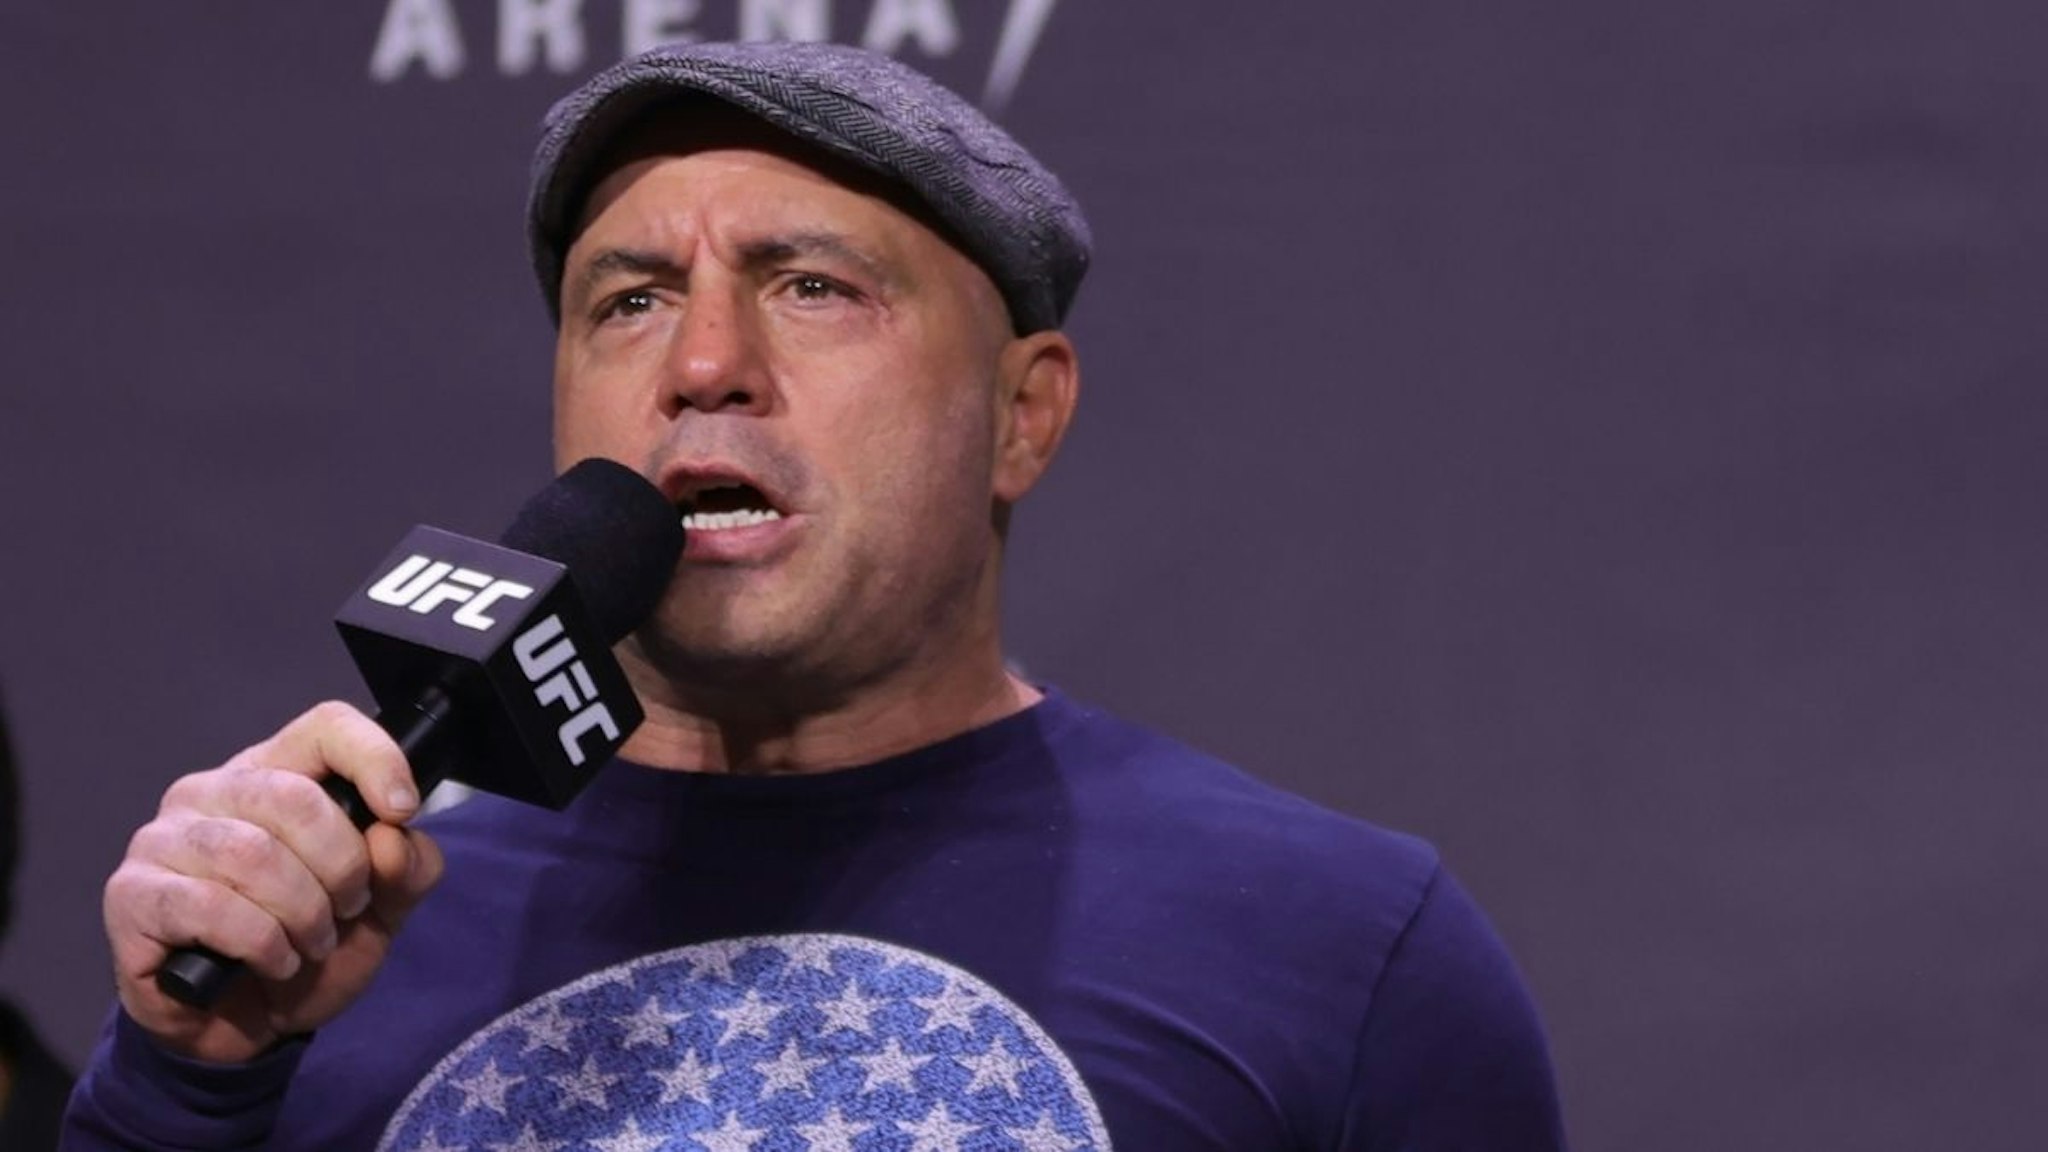 Joe Rogan introduces fighters during the UFC 269 ceremonial weigh-in at MGM Grand Garden Arena on December 10, 2021 in Las Vegas, Nevada.